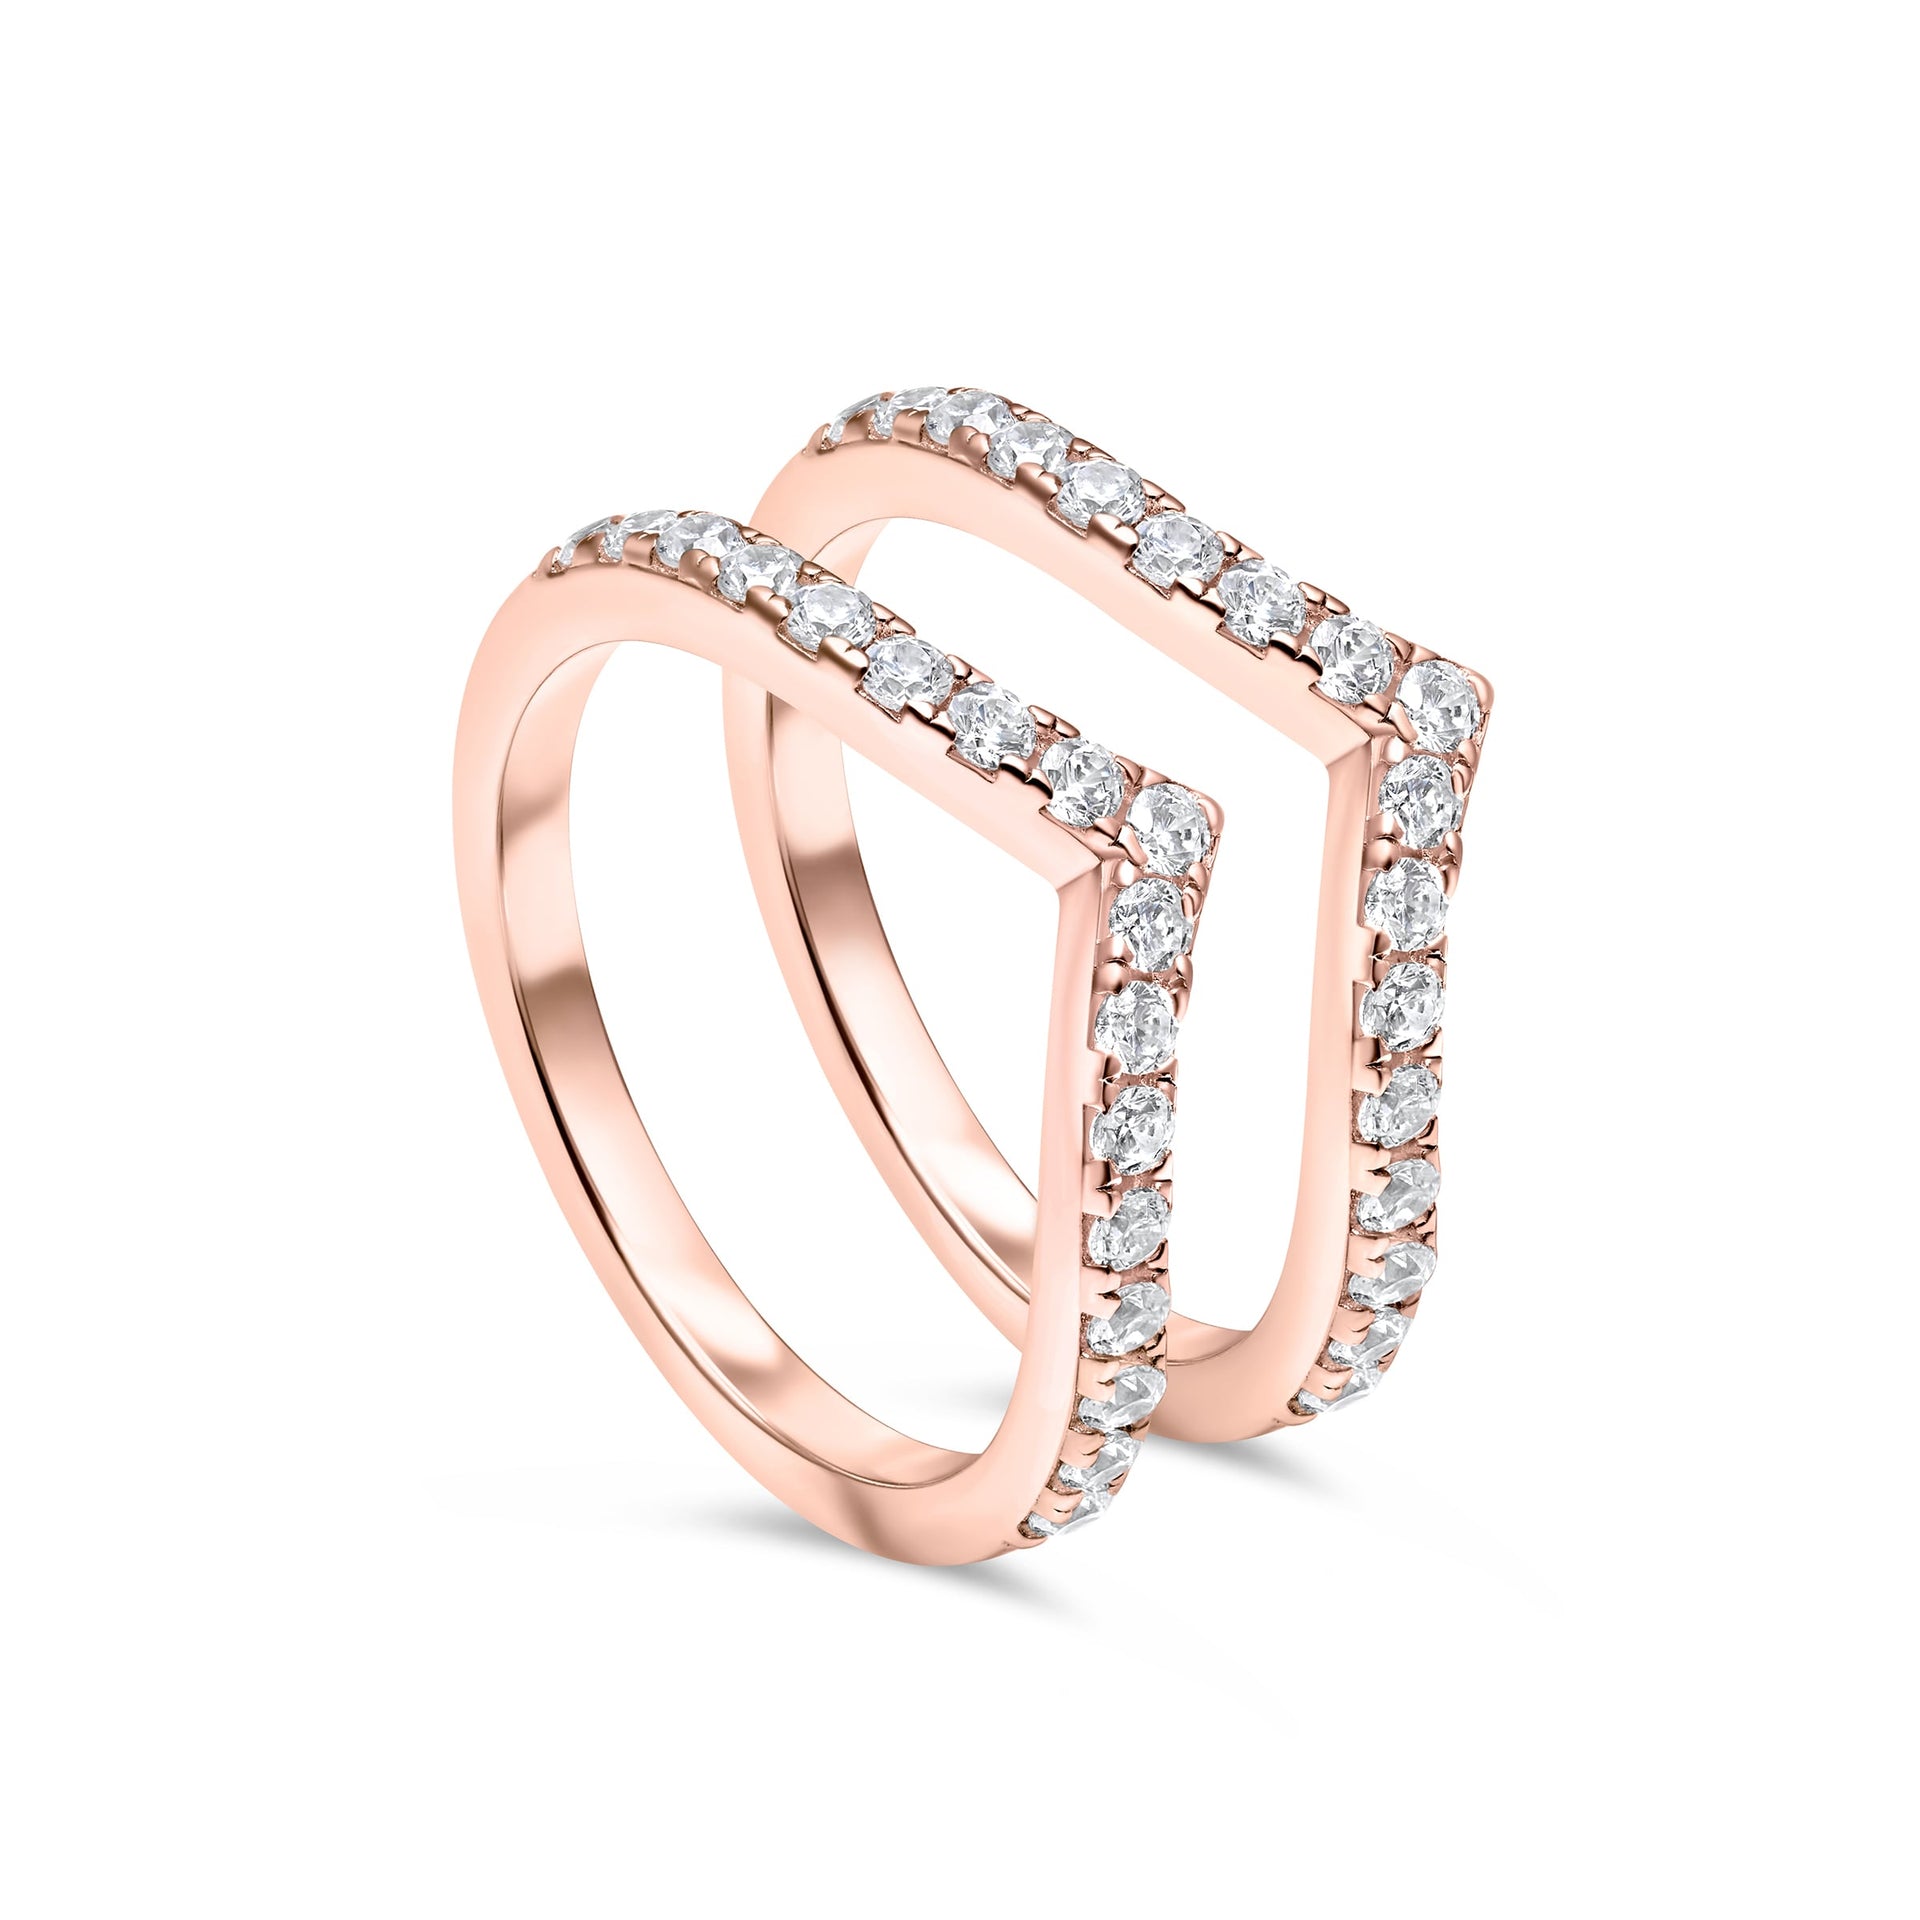 Rose gold set of two chevron wedding bands with half eternity detailing